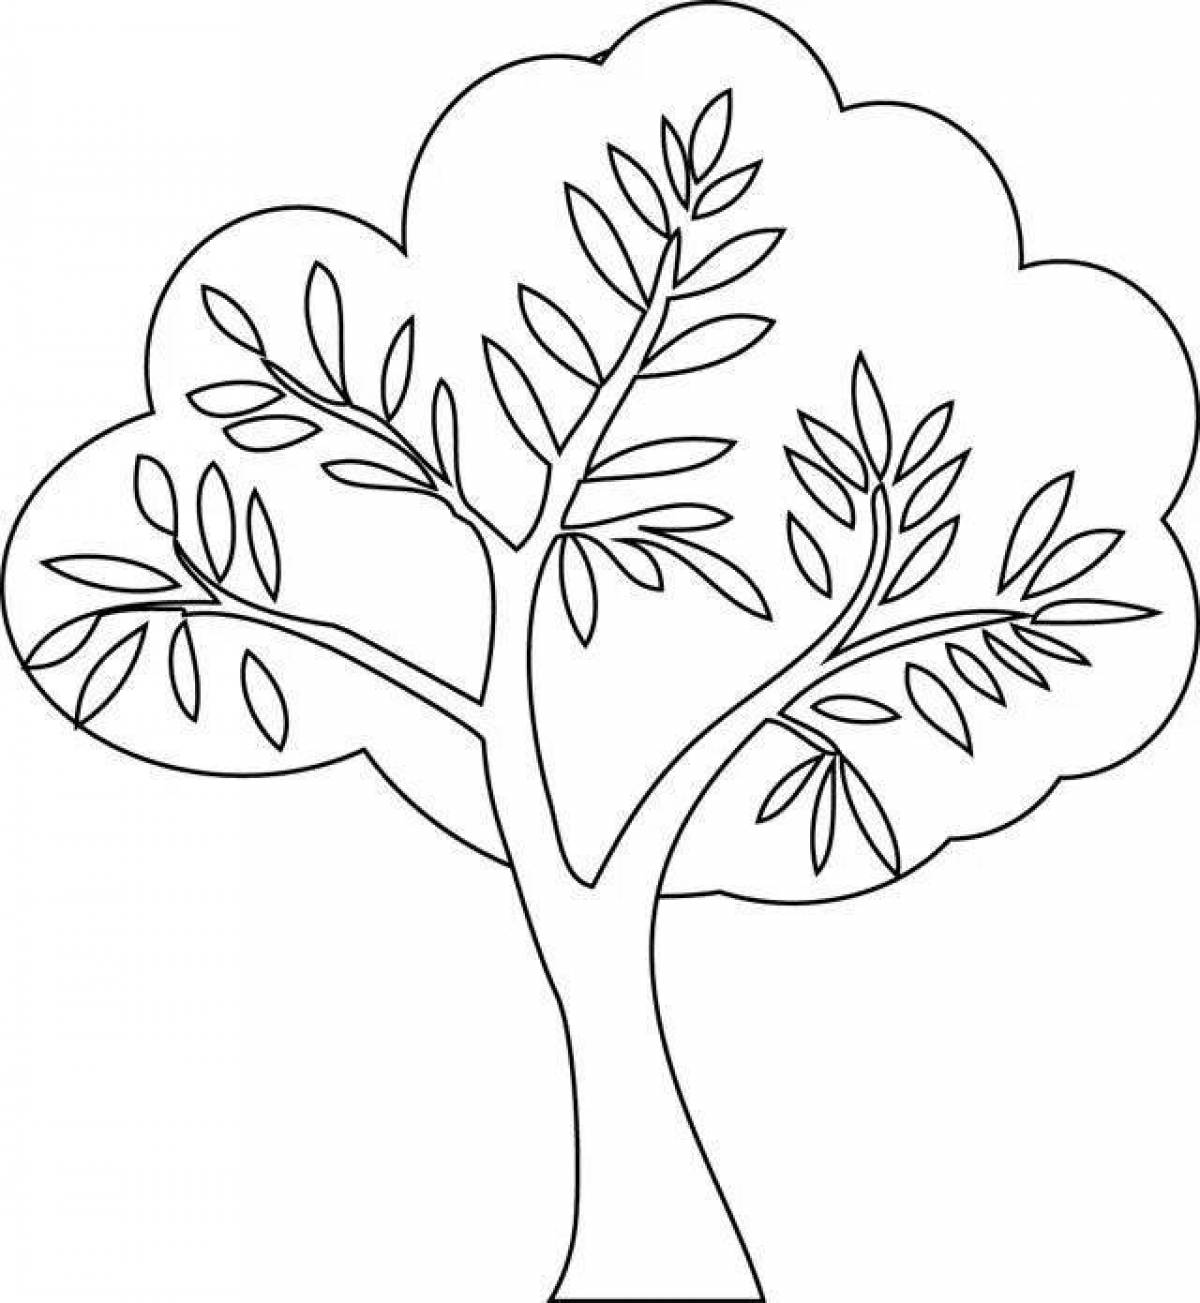 Colorful and fun tree coloring for kids